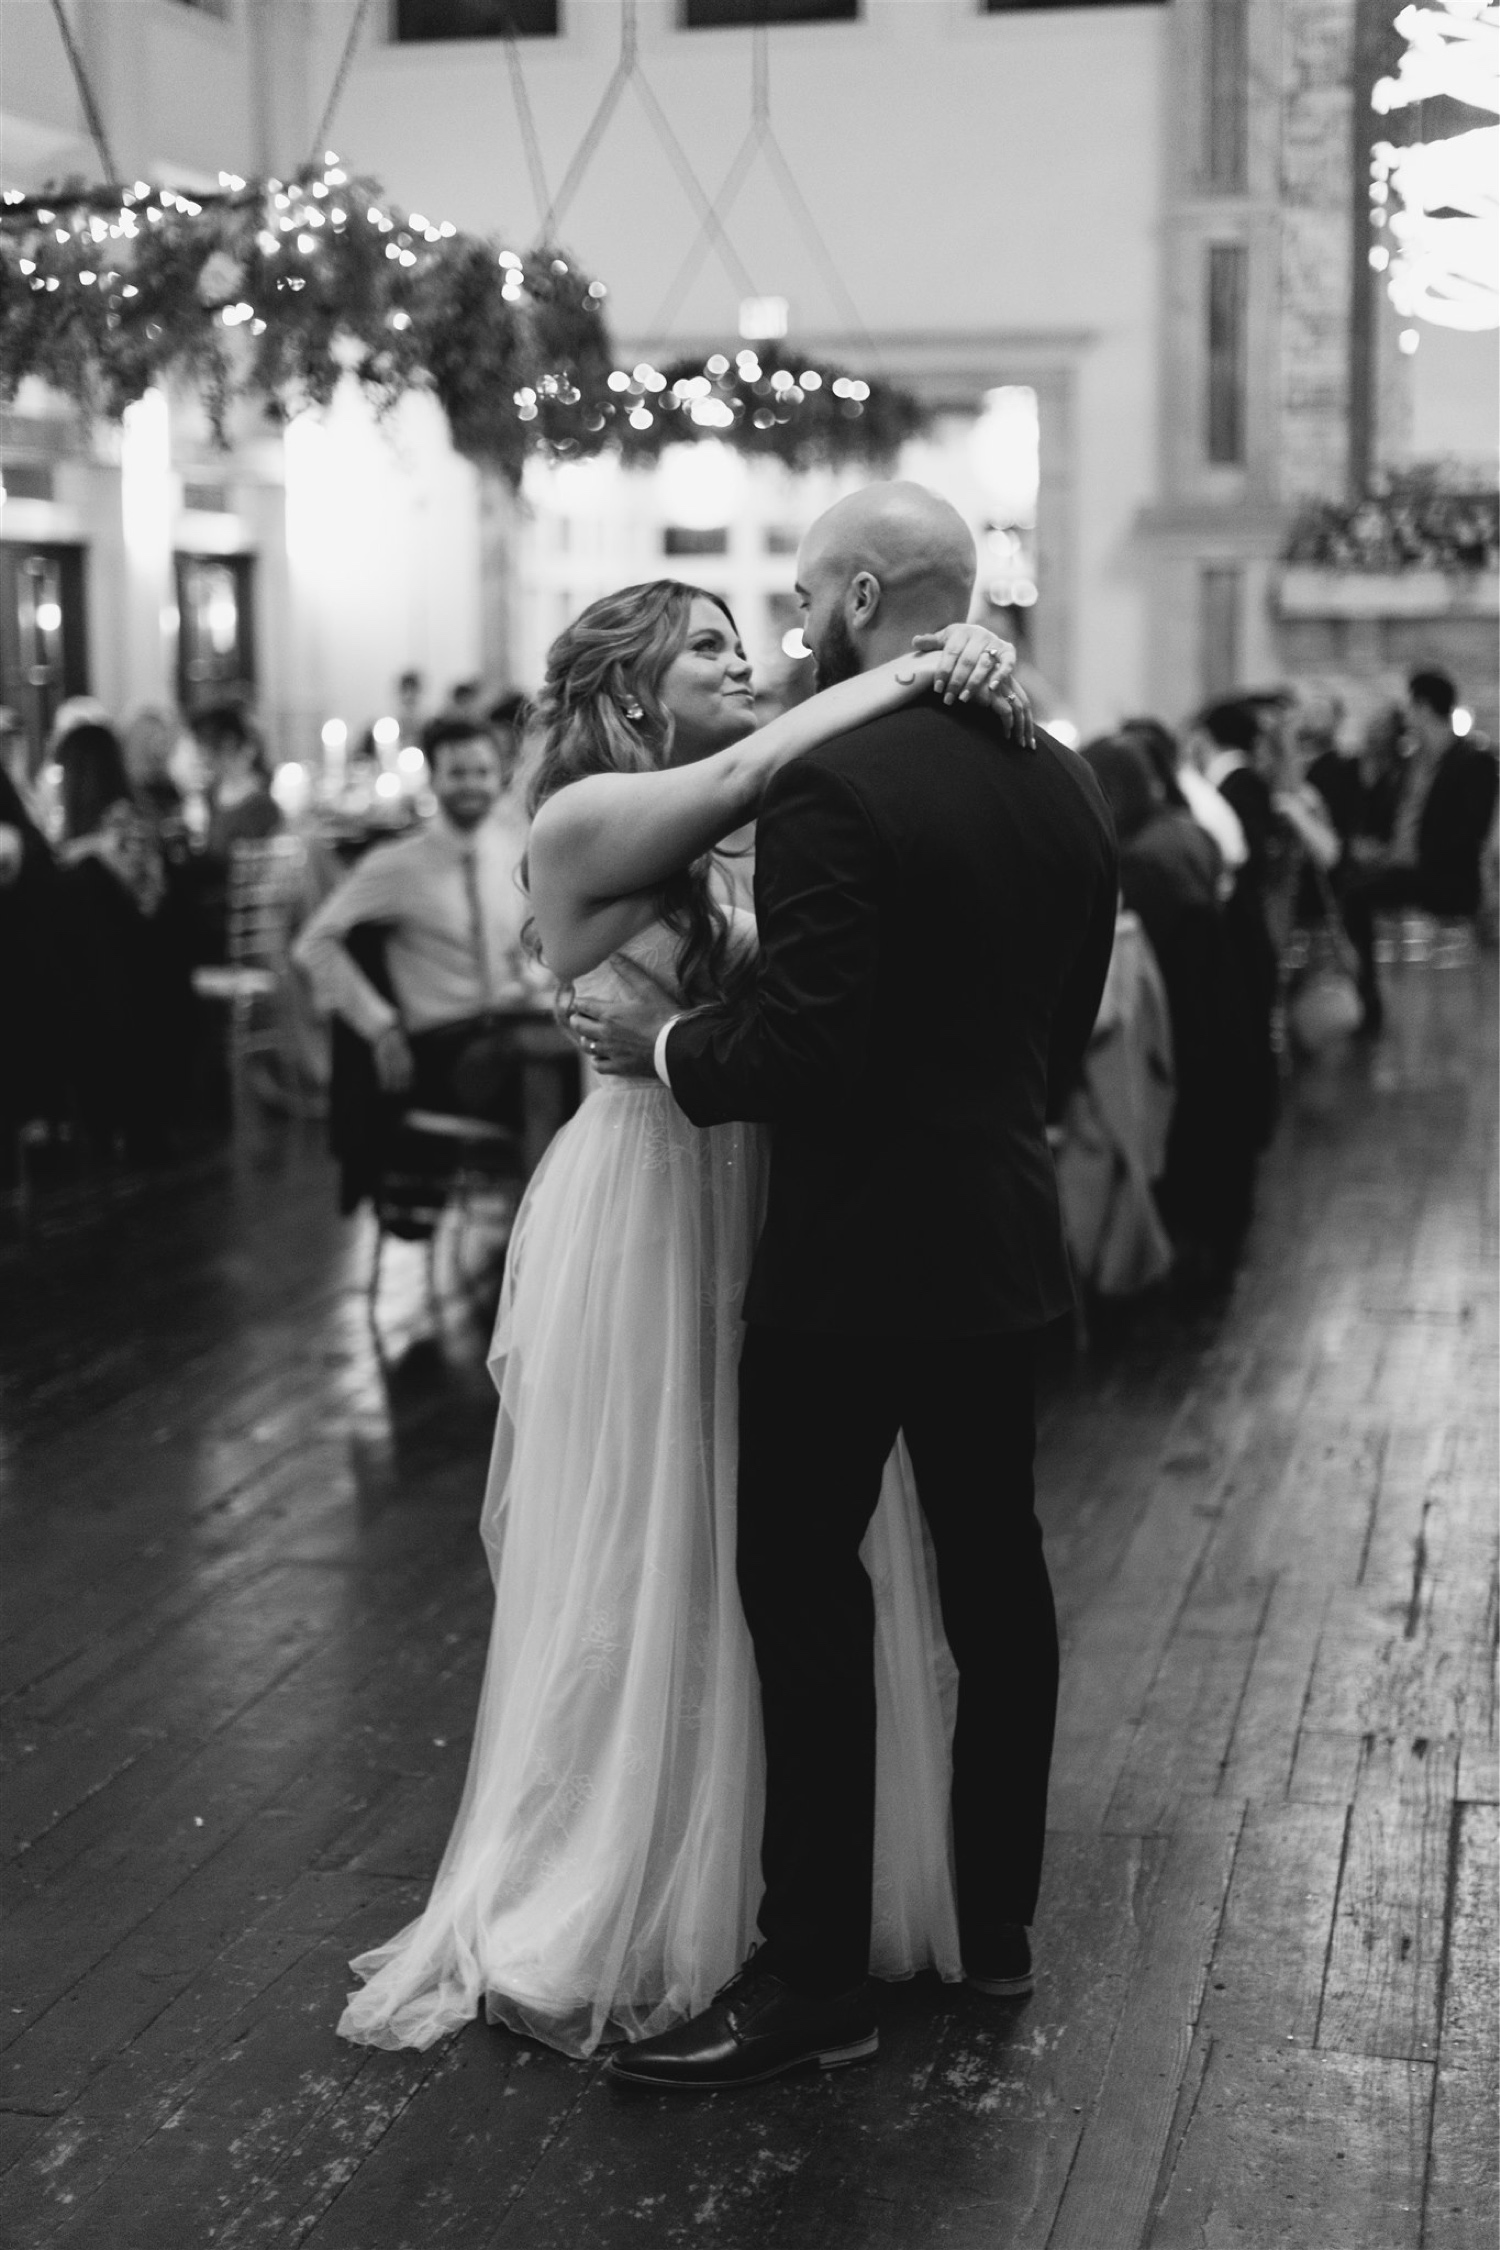 photojournalistic wedding photography by Hanna Walkowaik; documentary style wedding photography